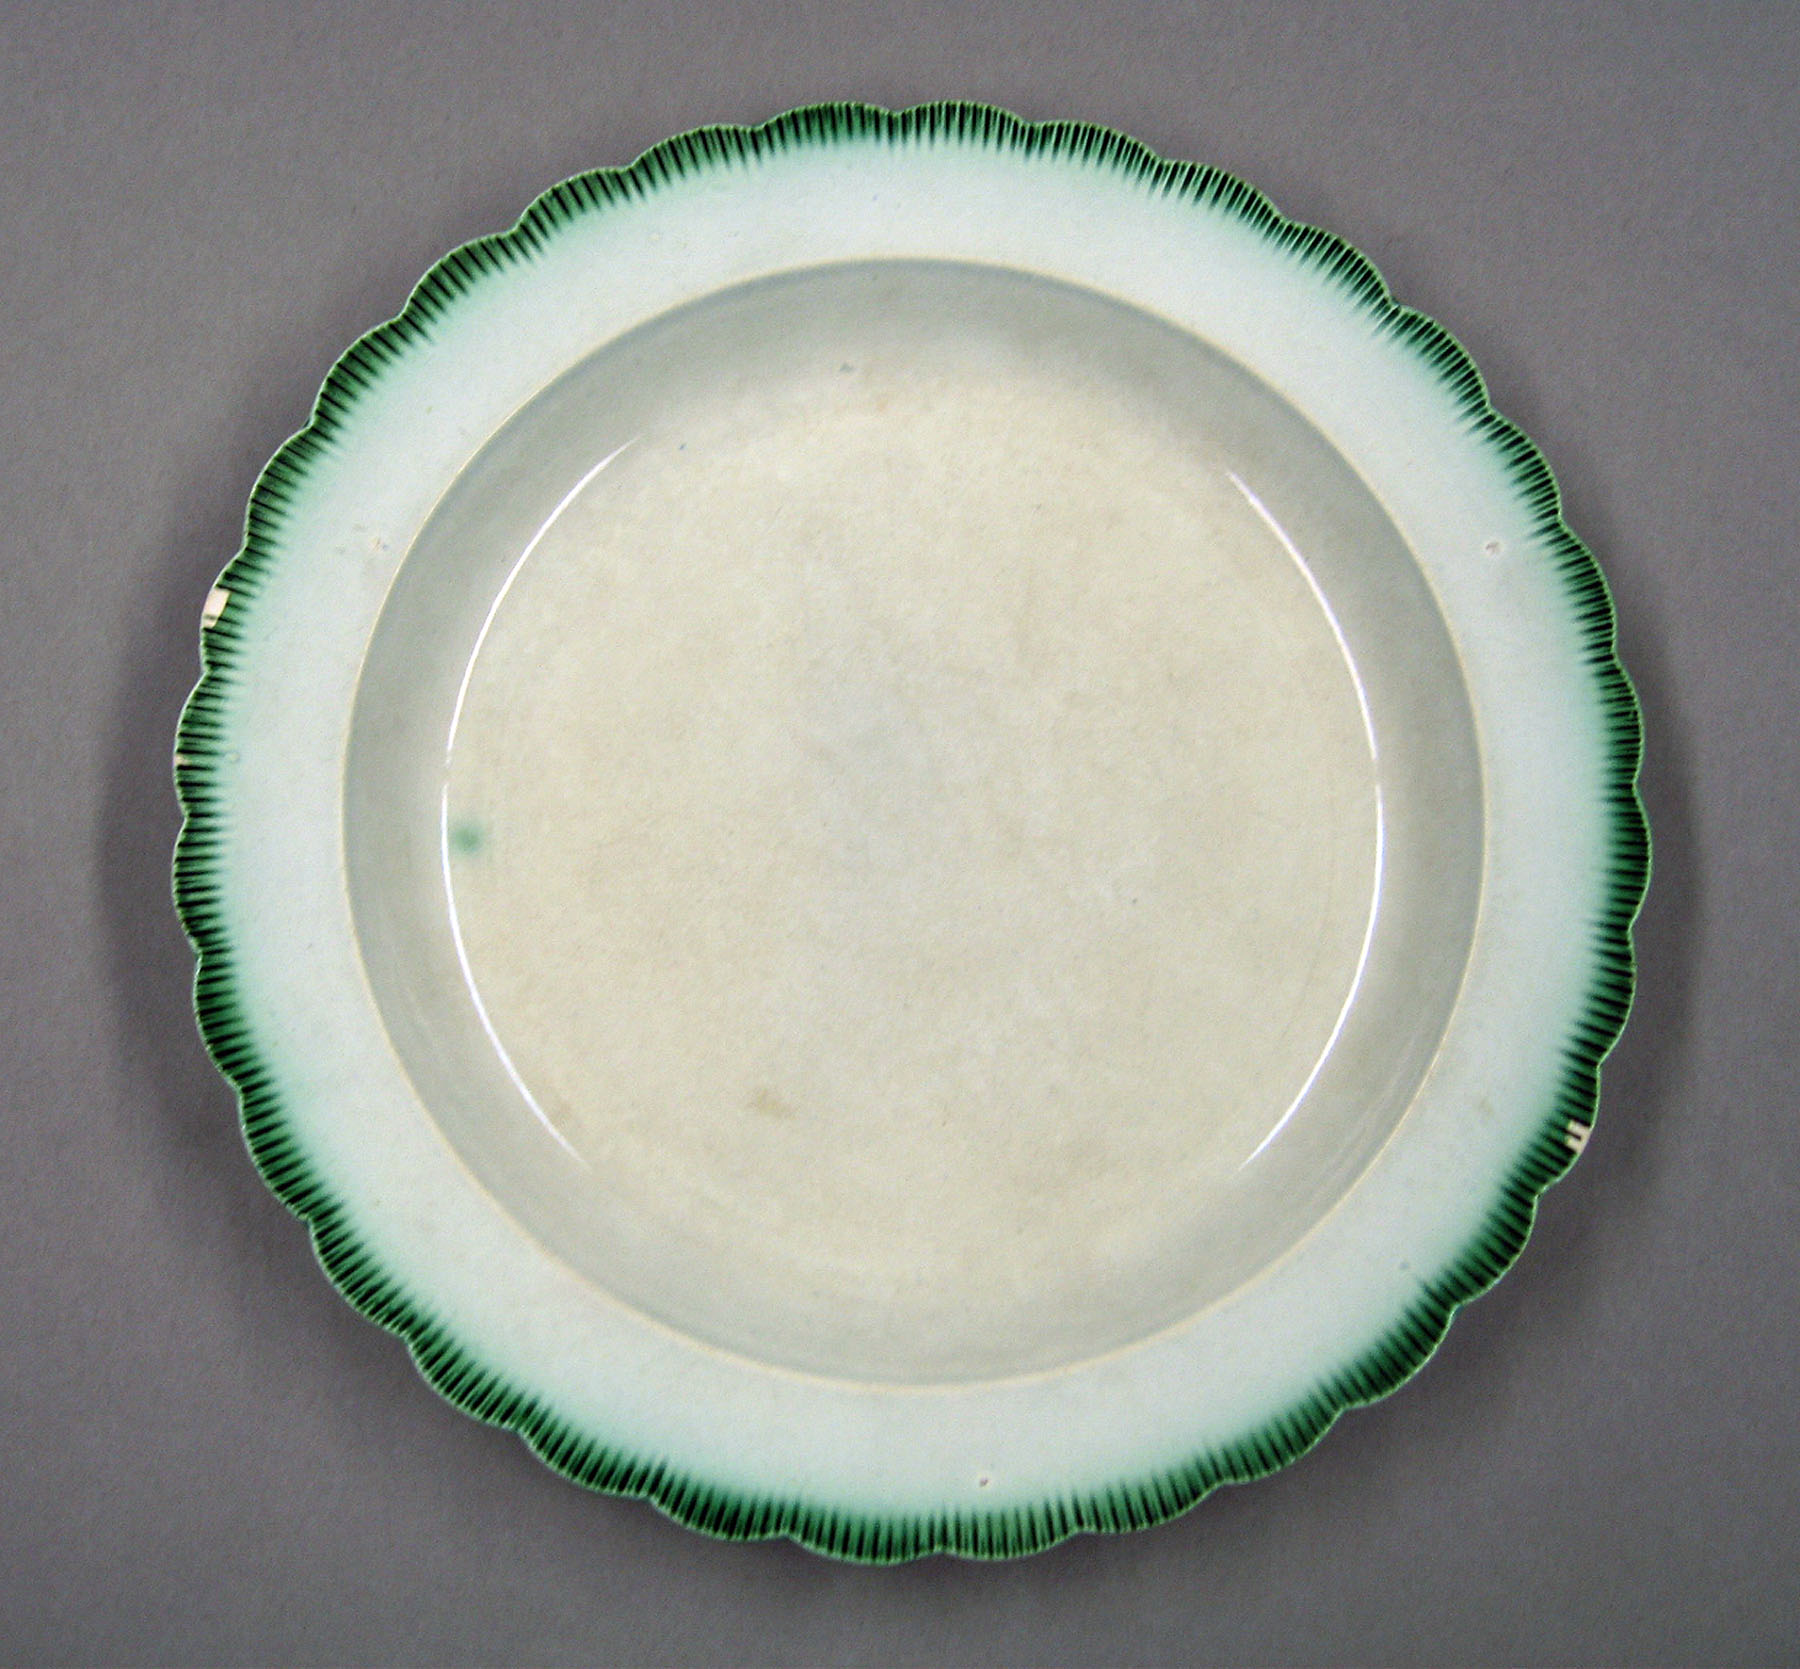 1969.0867.003 Sewell pearlware plate